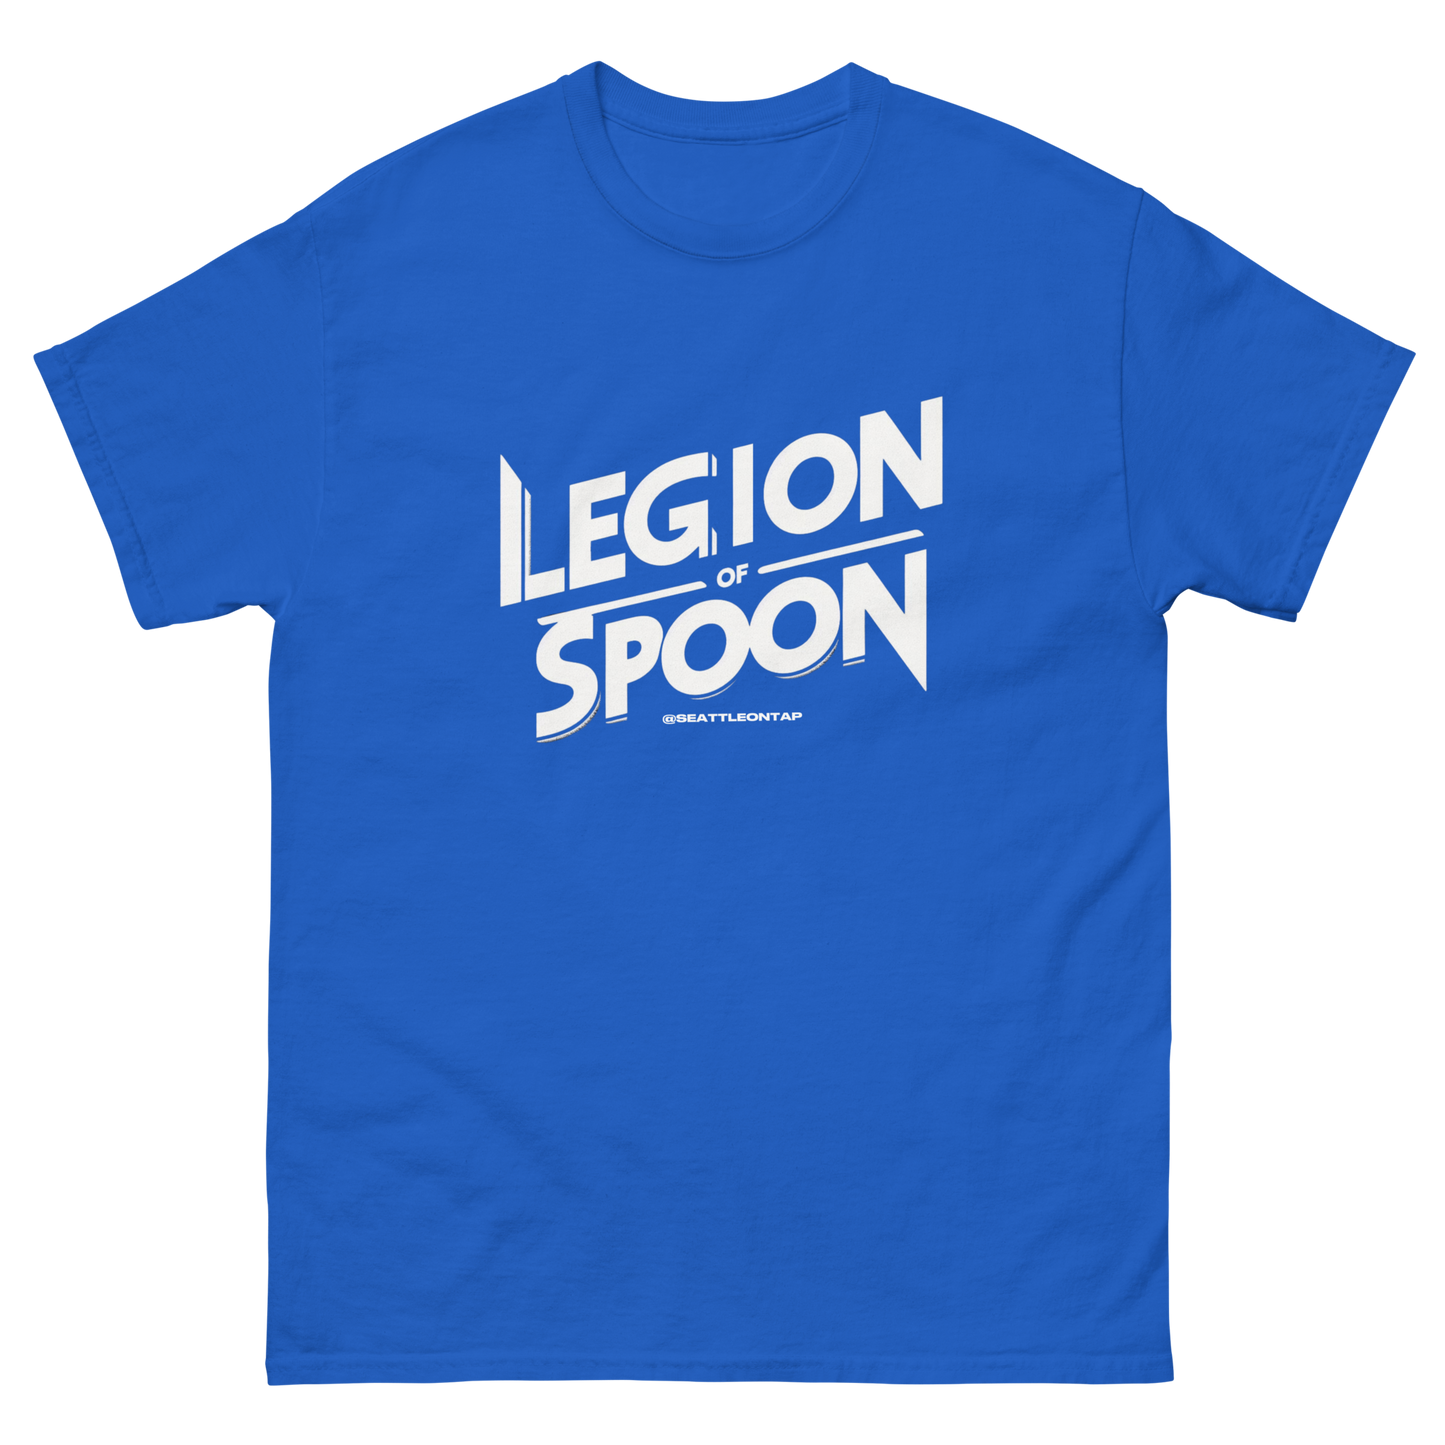 Welcome to the Legion of SPOON Seattle Football